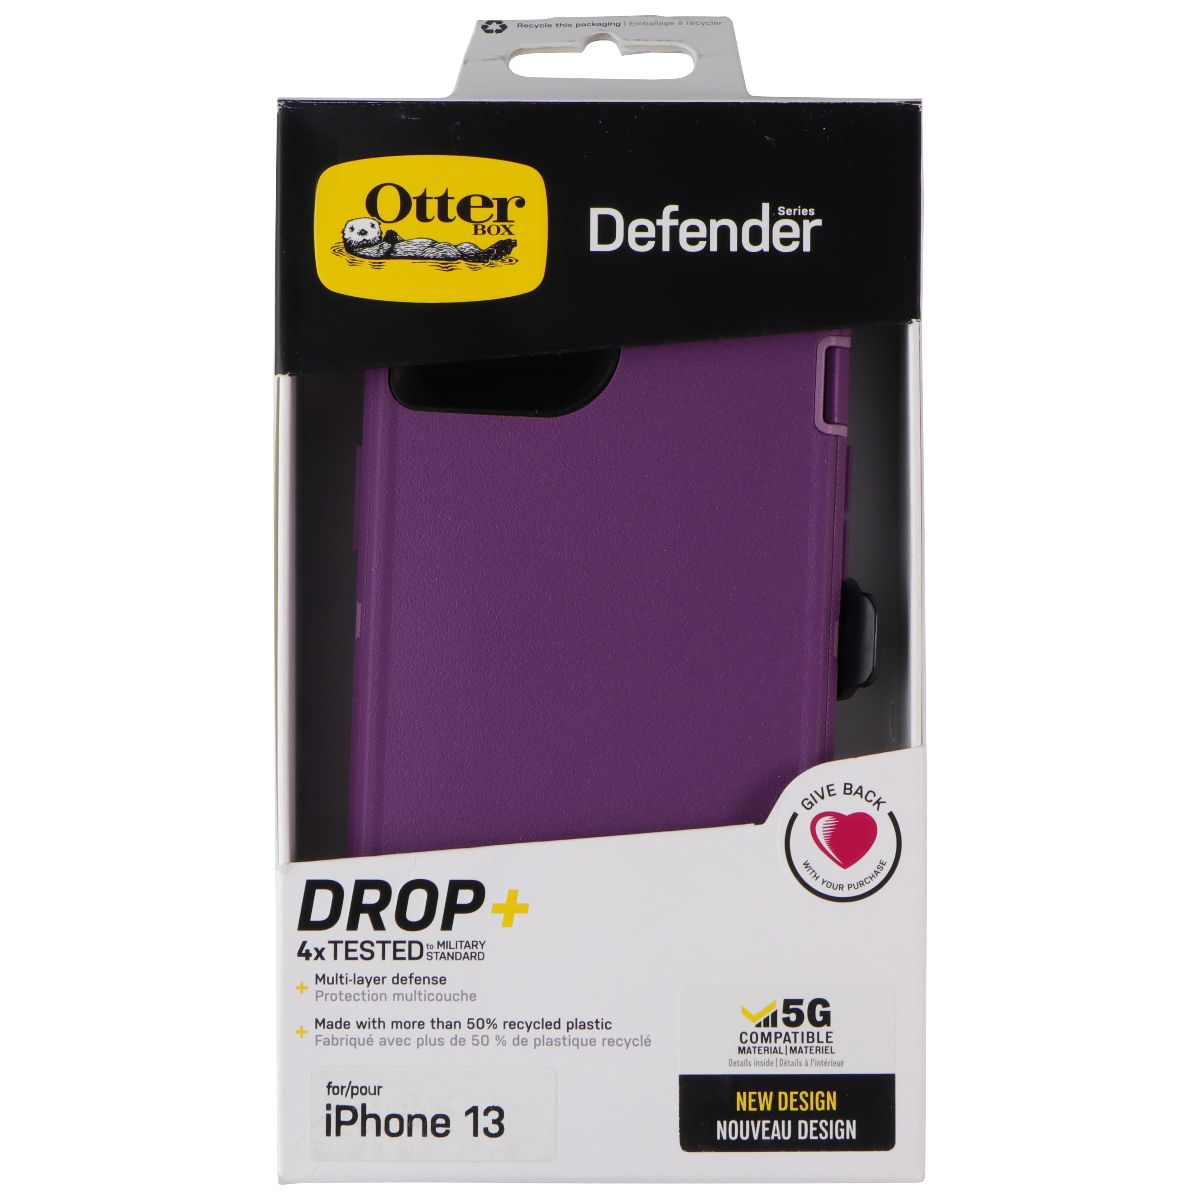 OtterBox Defender Series Case and Holster for Apple iPhone 13 (Only) - Purple